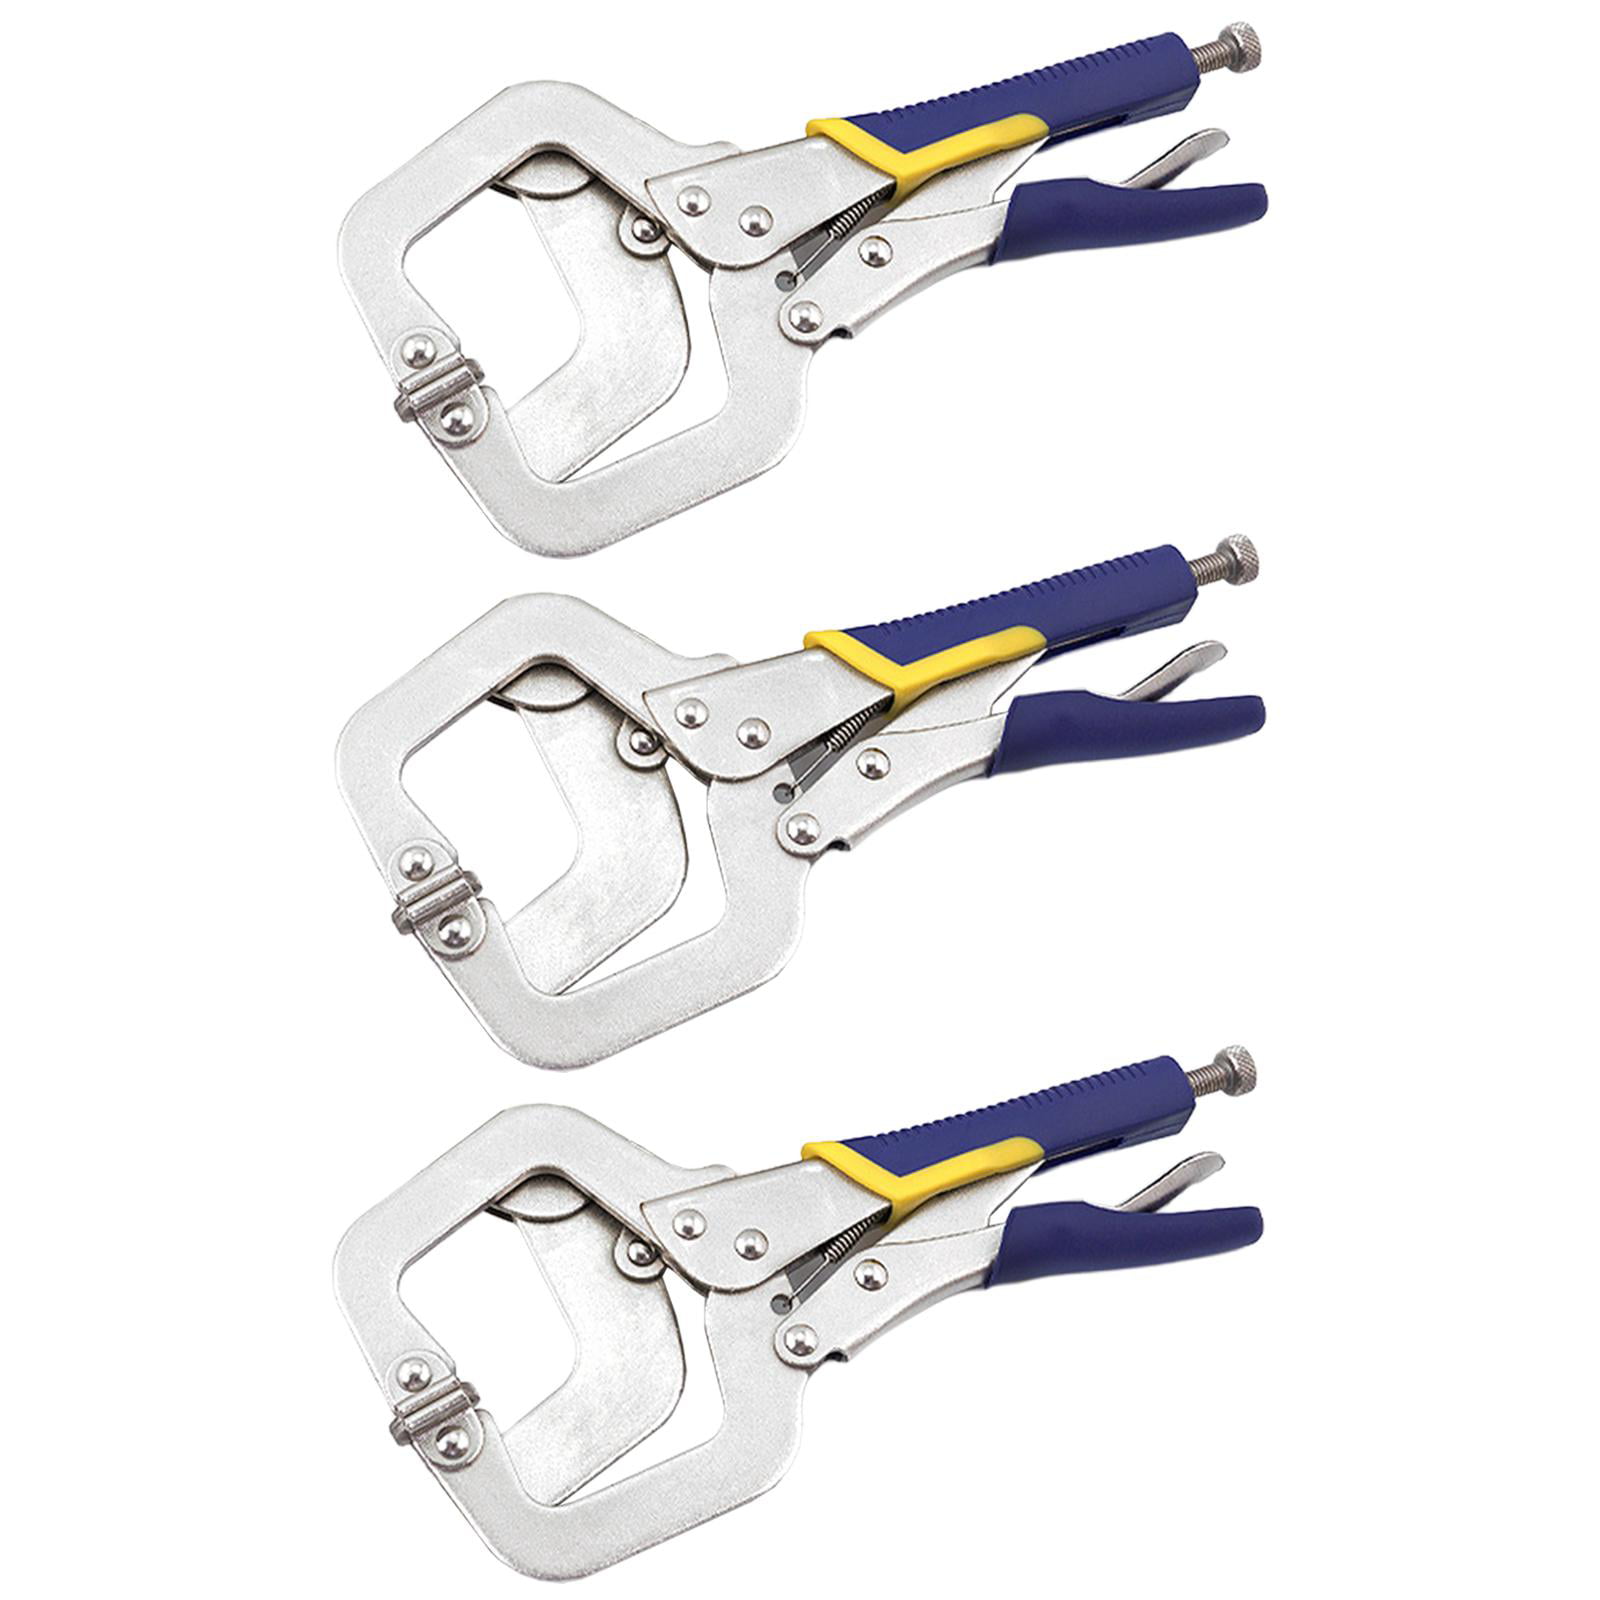 6" Locking C Clamp Face Clamp Pliers Steel 2Pcs Set with Swivel Pads Heavy Duty 